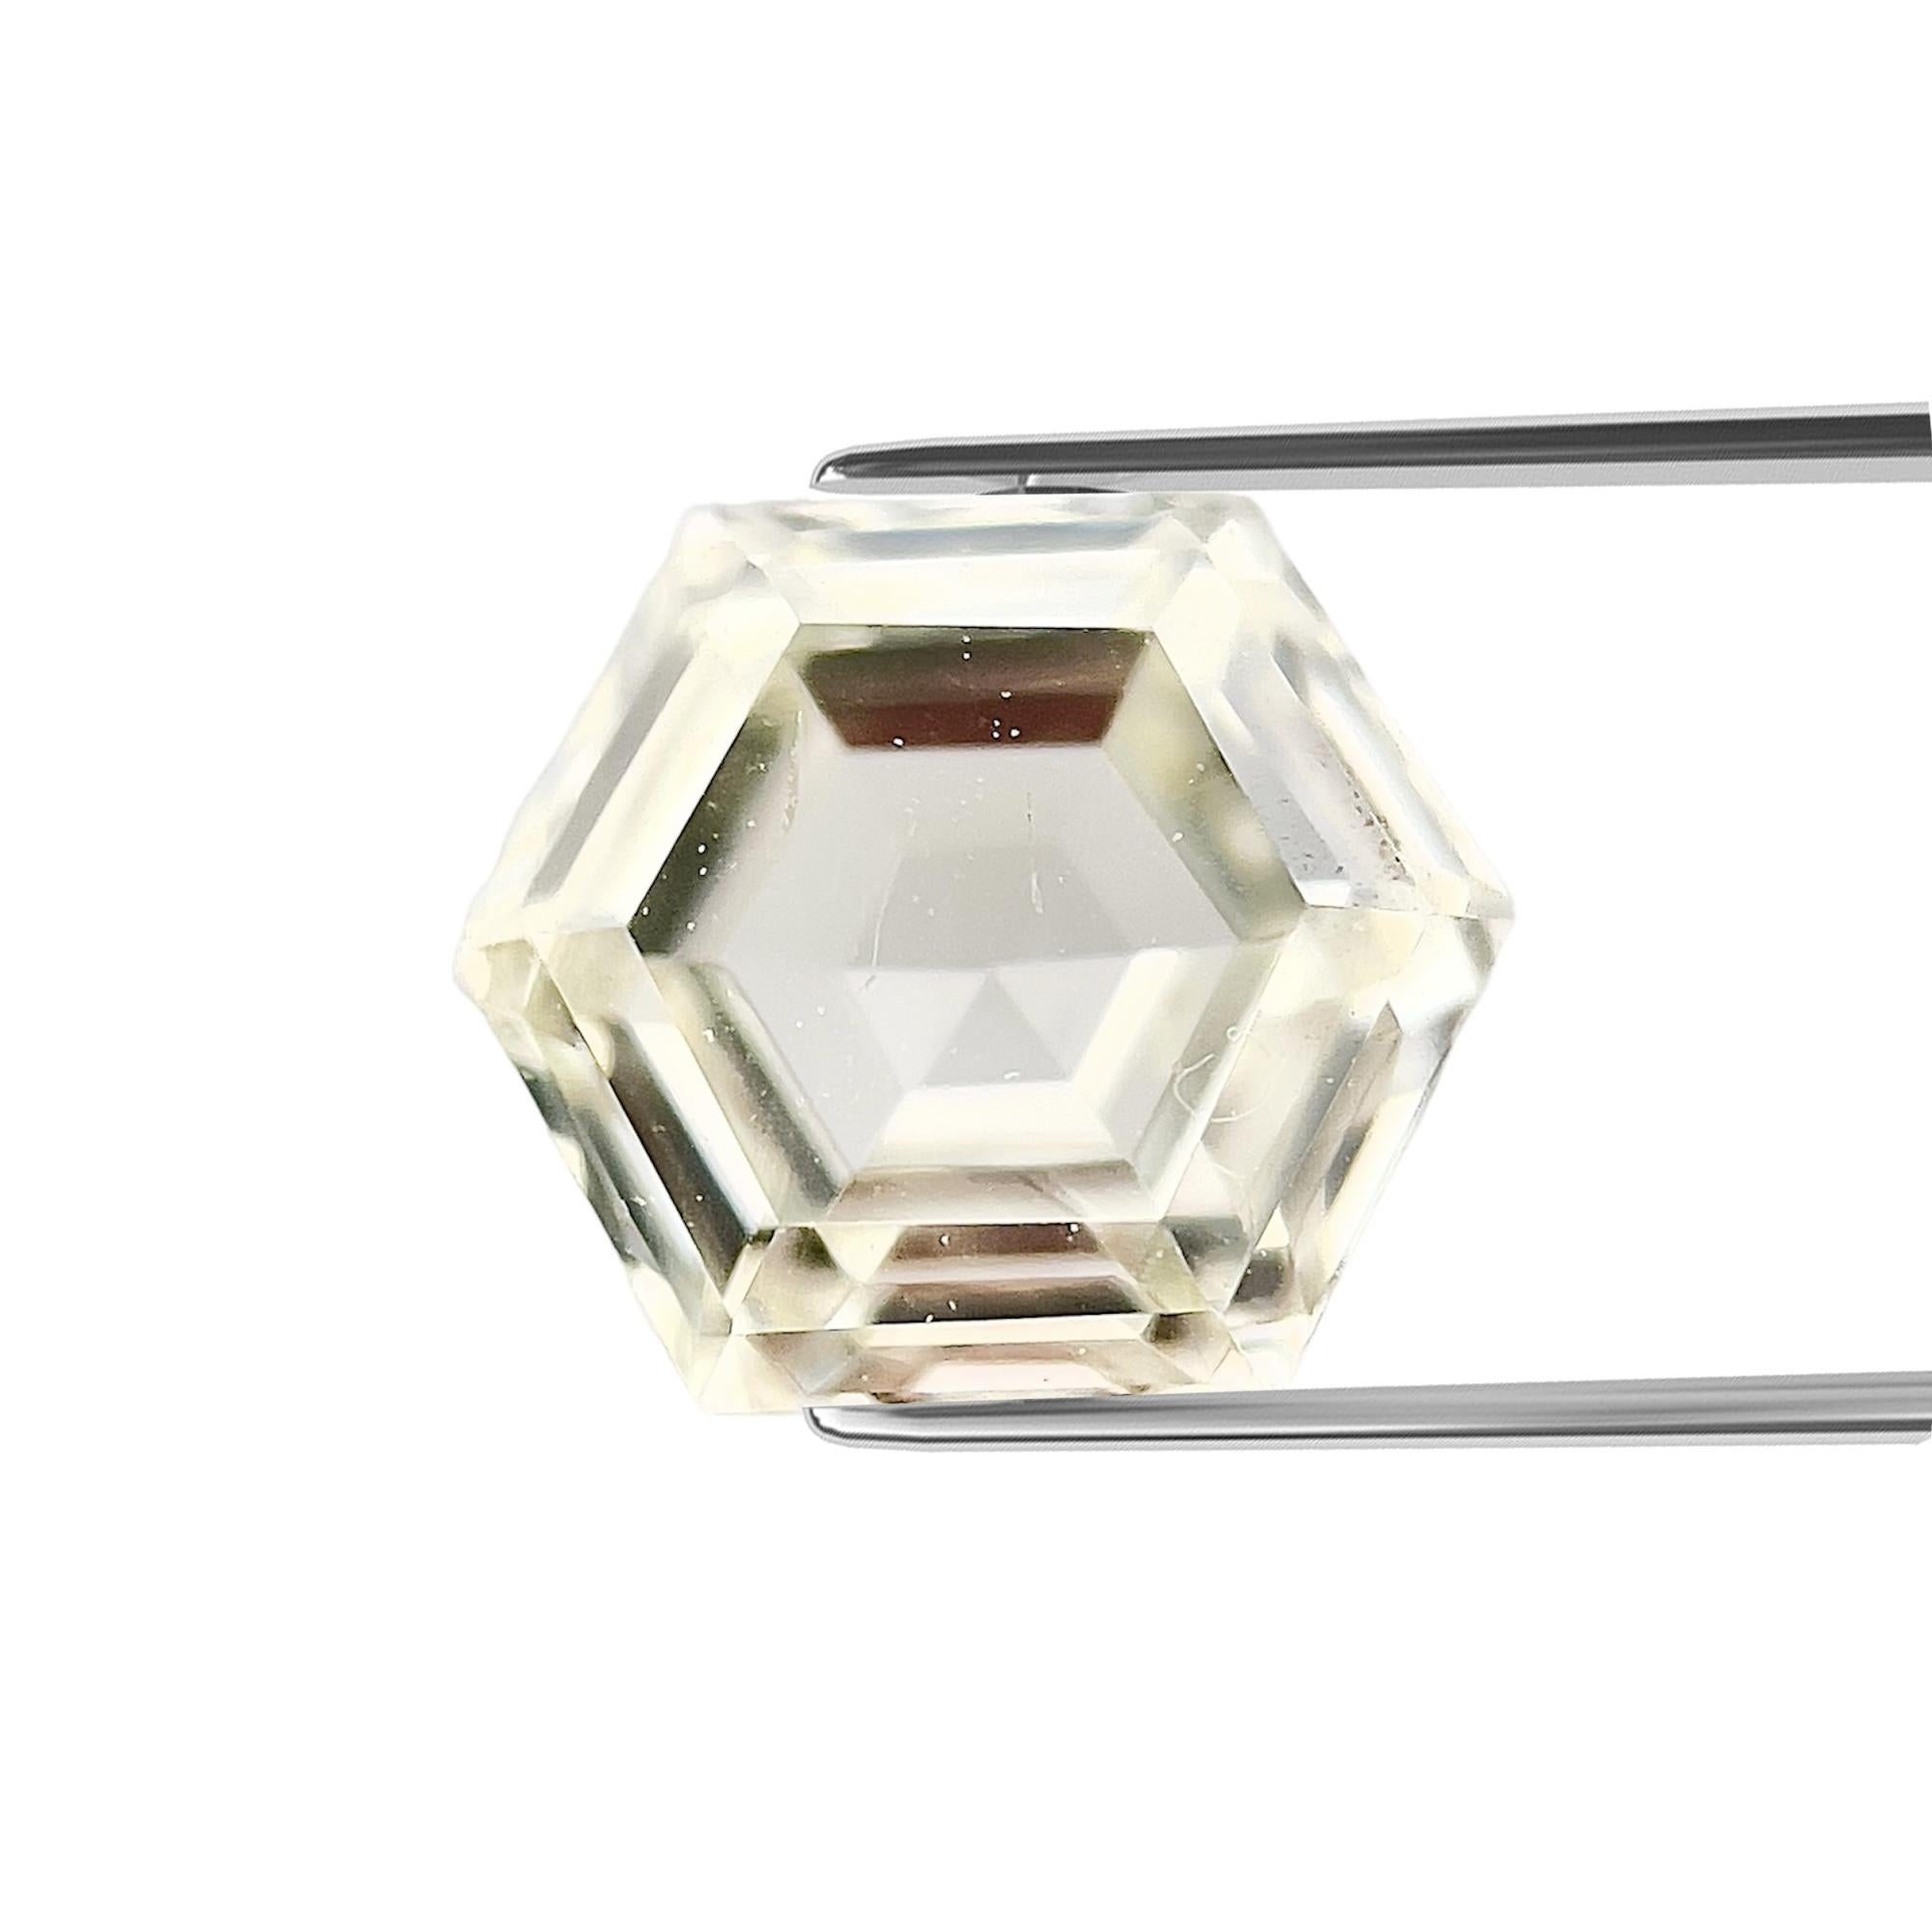 ITEM DESCRIPTION

ID #: NYC57271
Stone Shape: Hexagonal Cut
Diamond Weight: 0.51 CT
Clarity: VS2
Color: J
Measurements: 5.31x 4.66x 2.37 mm
Our Price: $1000.00
Appraisal Price: $1500.00


These genuine diamonds are graded approximate by our in house